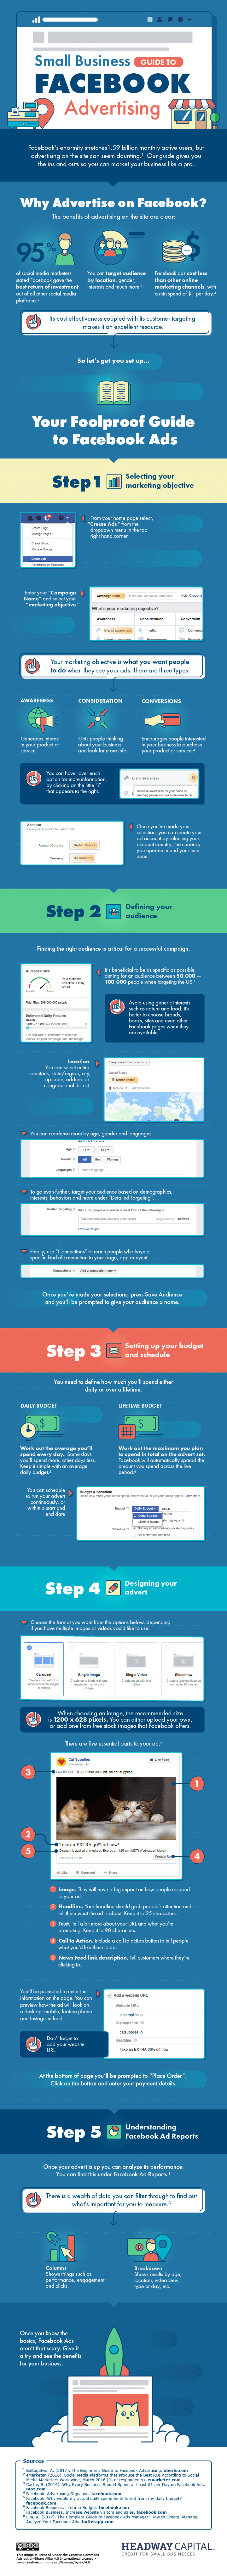 Small Business Guide to Facebook Advertising #infographic